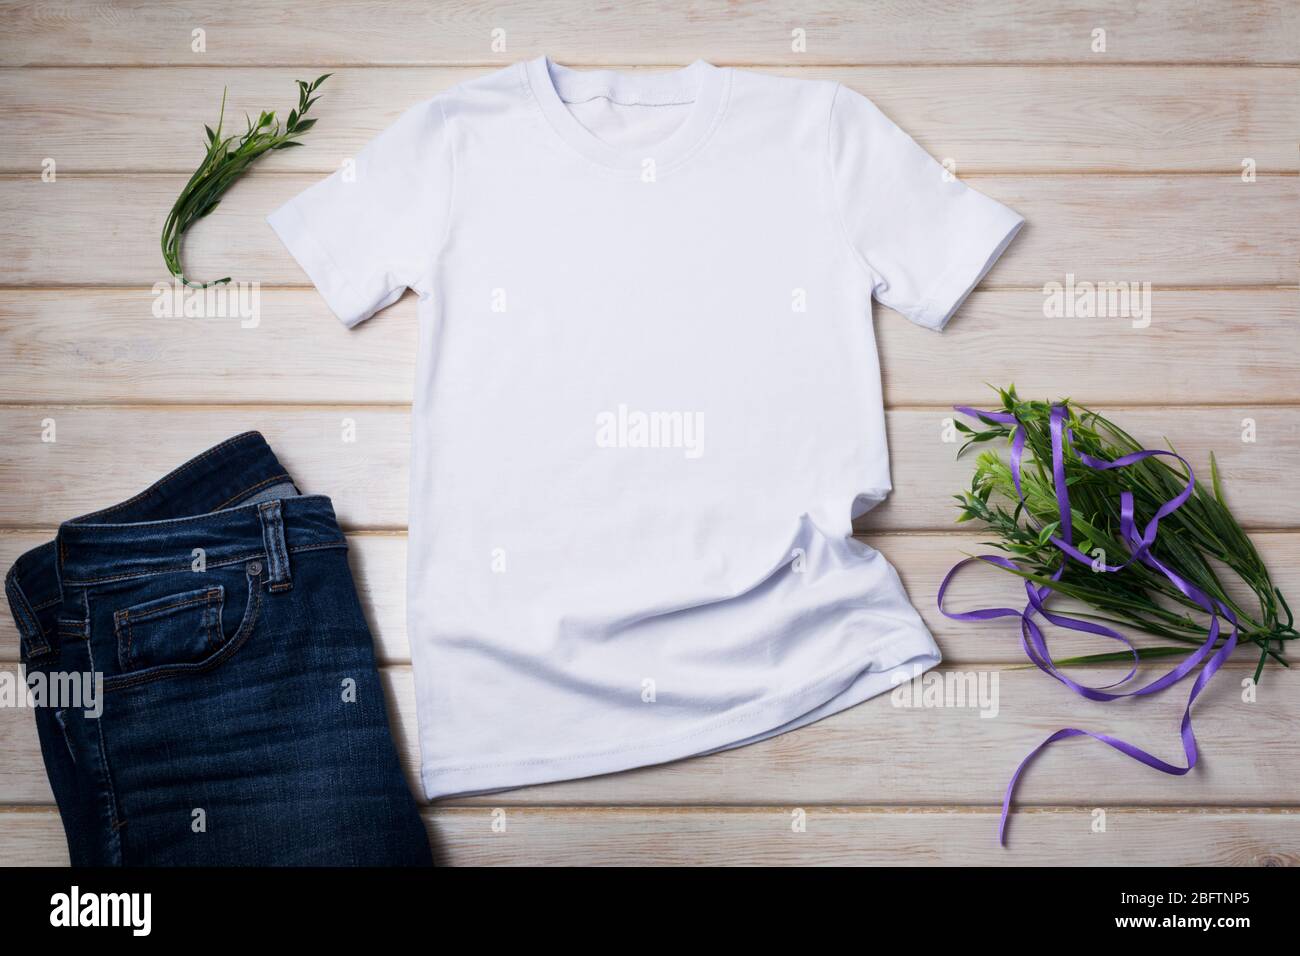 White Unisex Cotton T-Shirt Mockup With Jeans, Grass And Purple Ribbon.  Design T Shirt Template, Tee Print Presentation Mock Up Stock Photo - Alamy